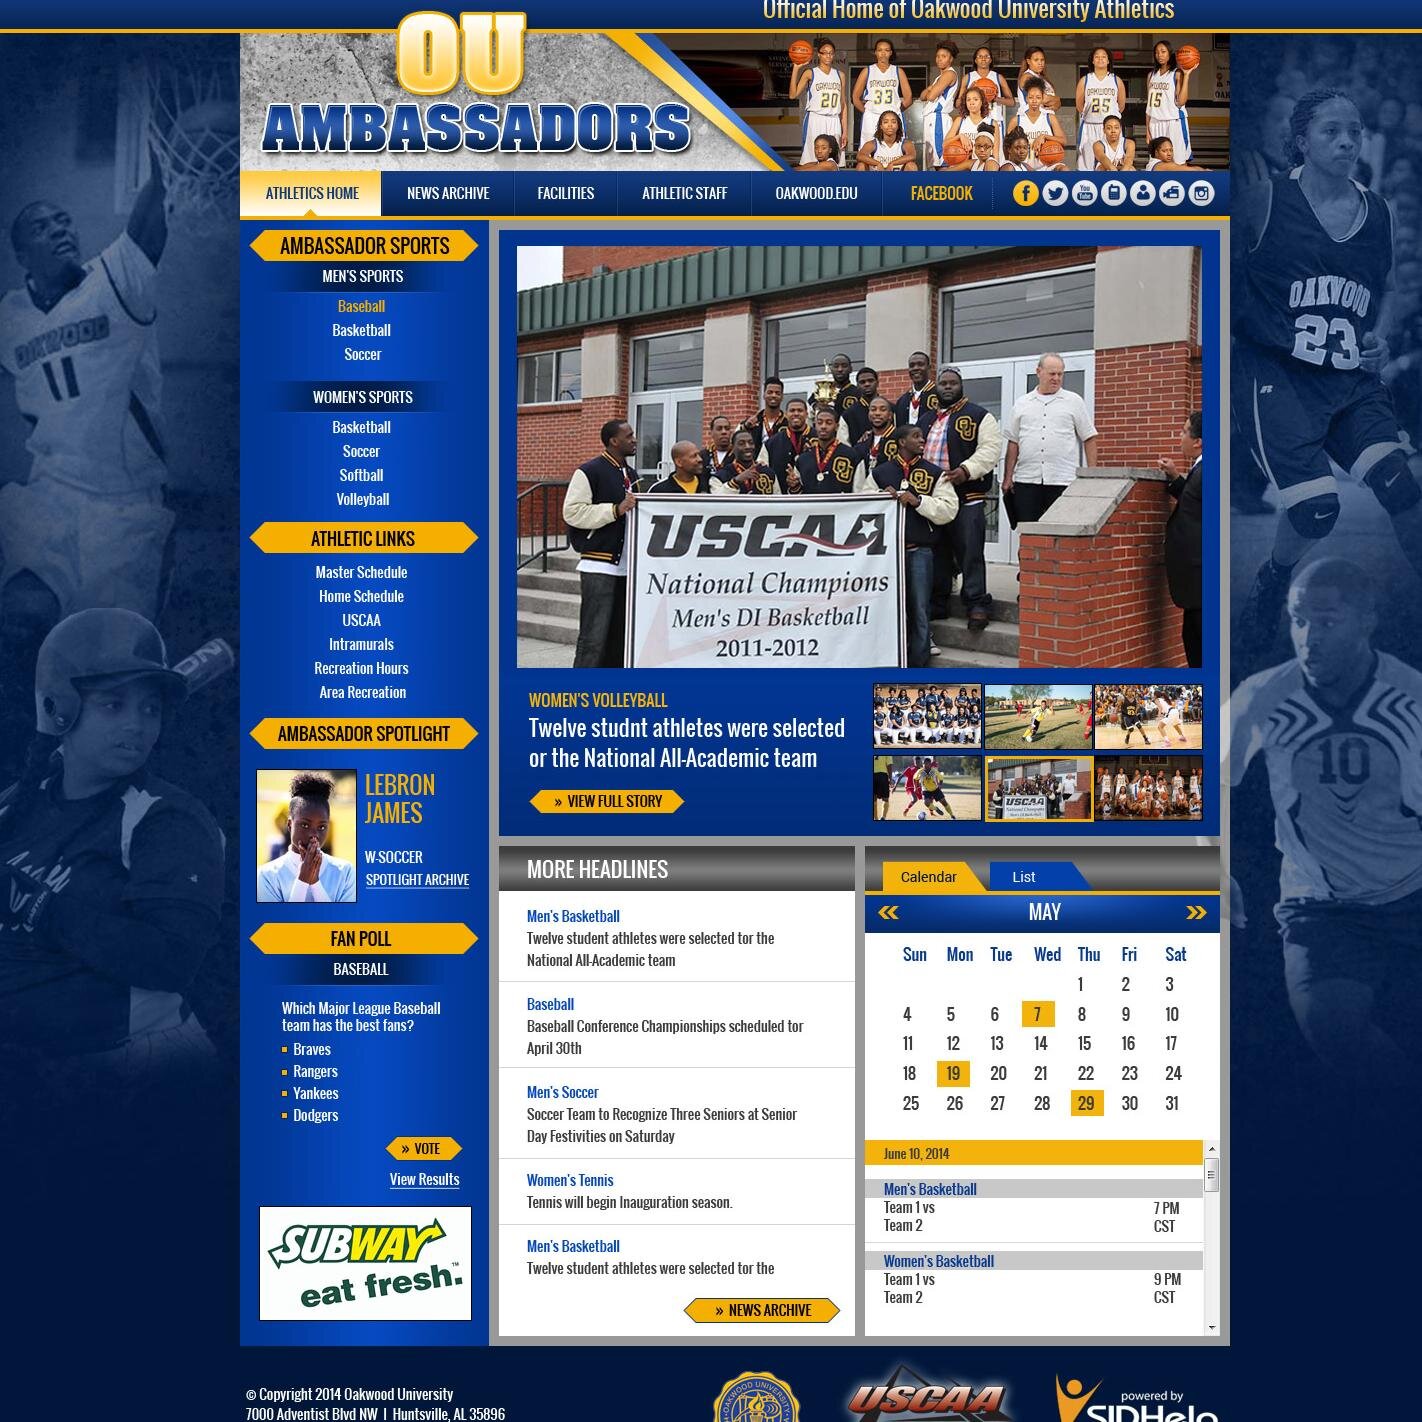 Official Page of  Oakwood University Athletic Department! Go OU Ambassadors! I Bleed Blue and Gold!